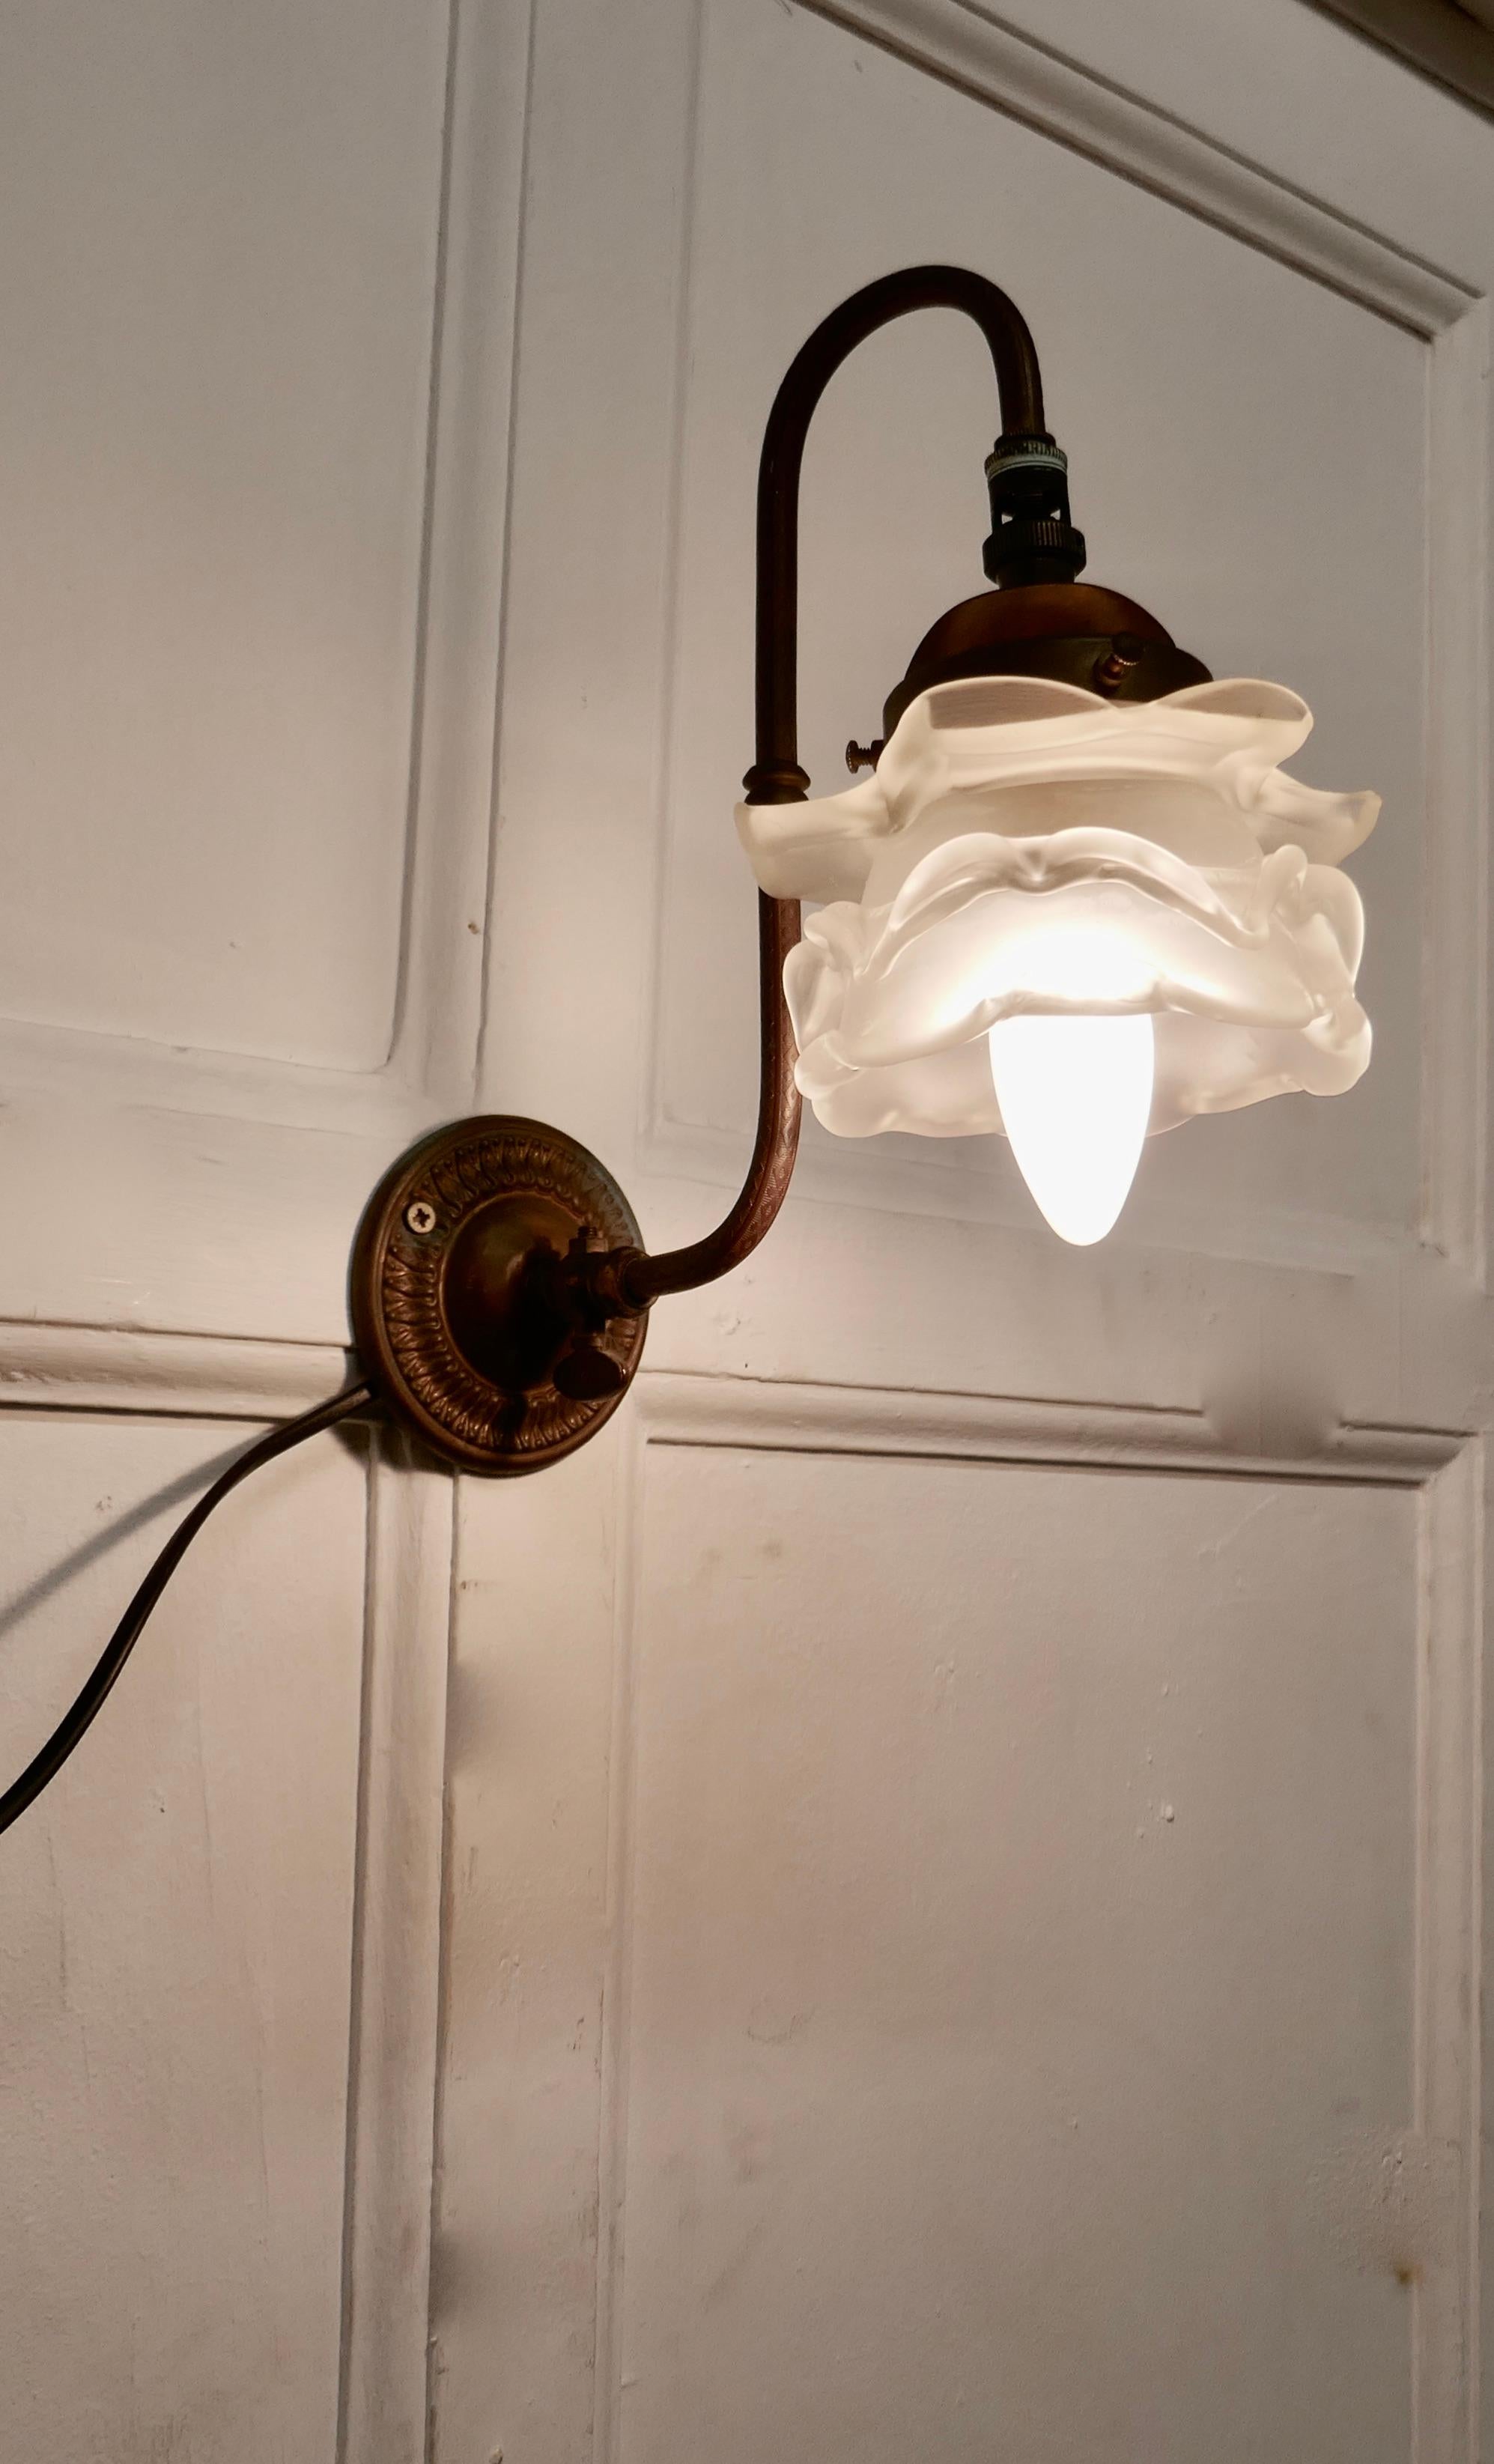 Victorian wall light with flower shade

The light has a brass swan neck arms, and a flower design opalescent shade
The brass is darkened with age, the shade is original and not damaged
This piece is working, with newish wiring, but will require